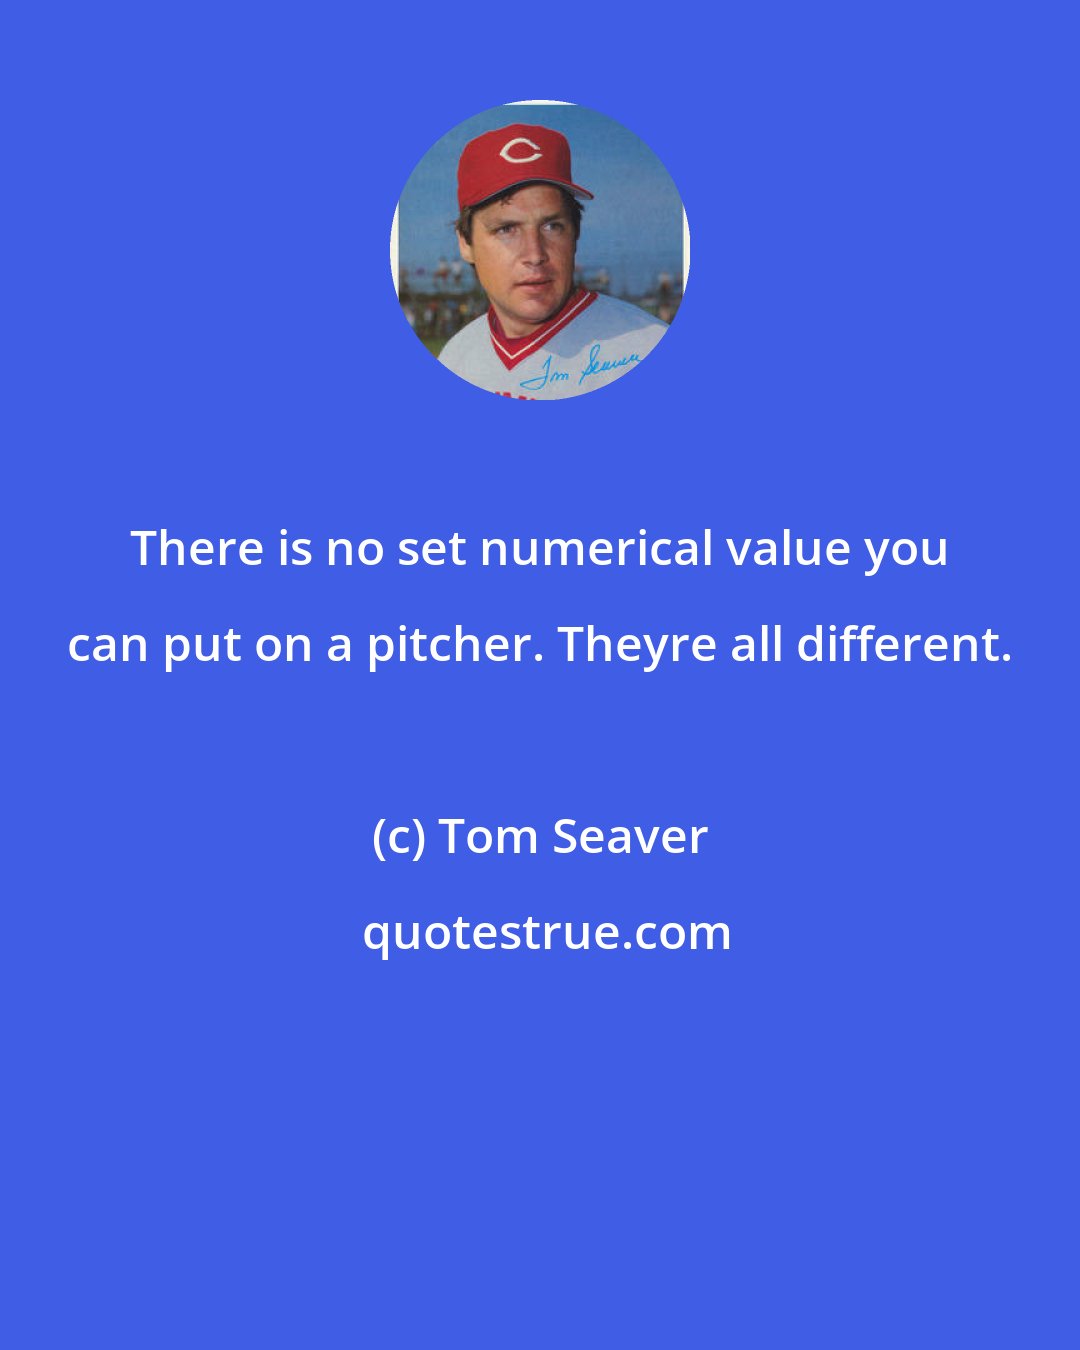 Tom Seaver: There is no set numerical value you can put on a pitcher. Theyre all different.